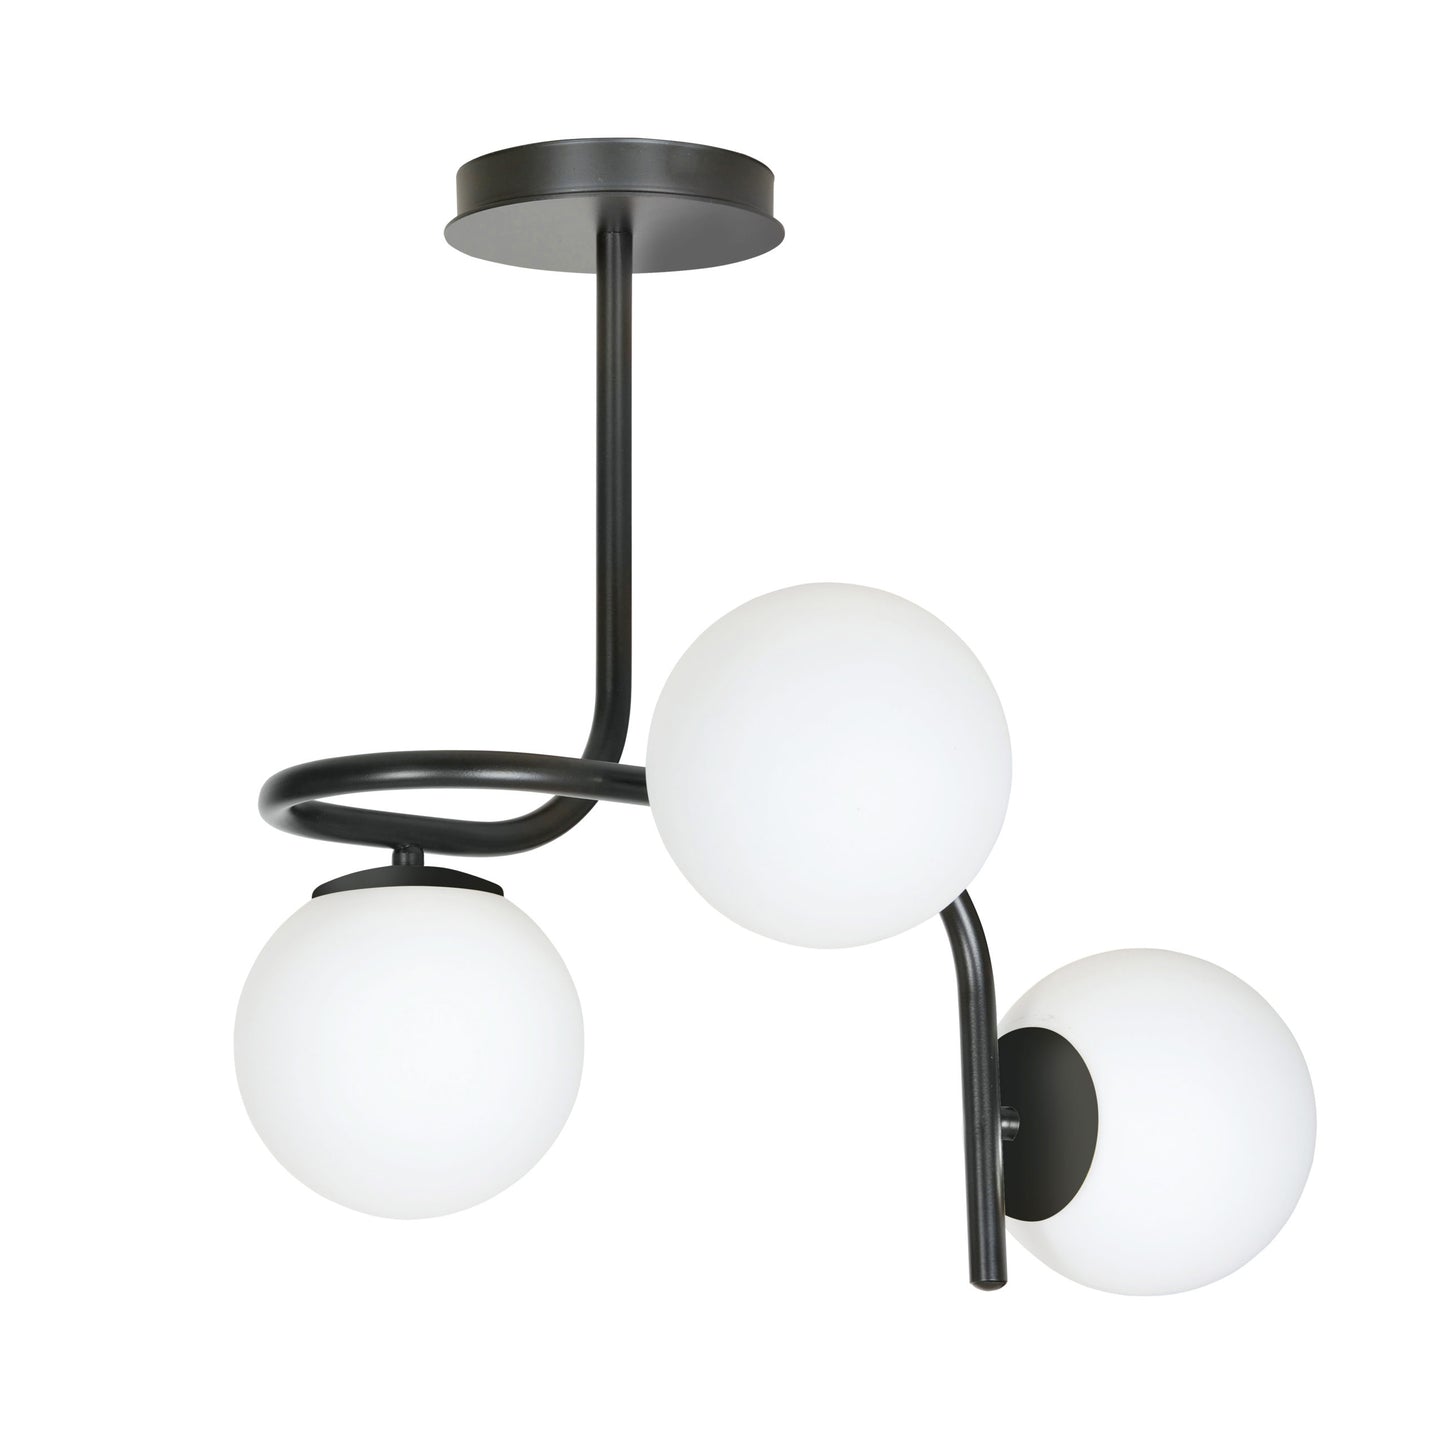 Kalf 3 is modern and contemporary in its design which is inspired by the industrial trend. The black powder coated arms are complimented by three round frosted glass globe shades creating a stand out feature for any living, dining or bedroom.